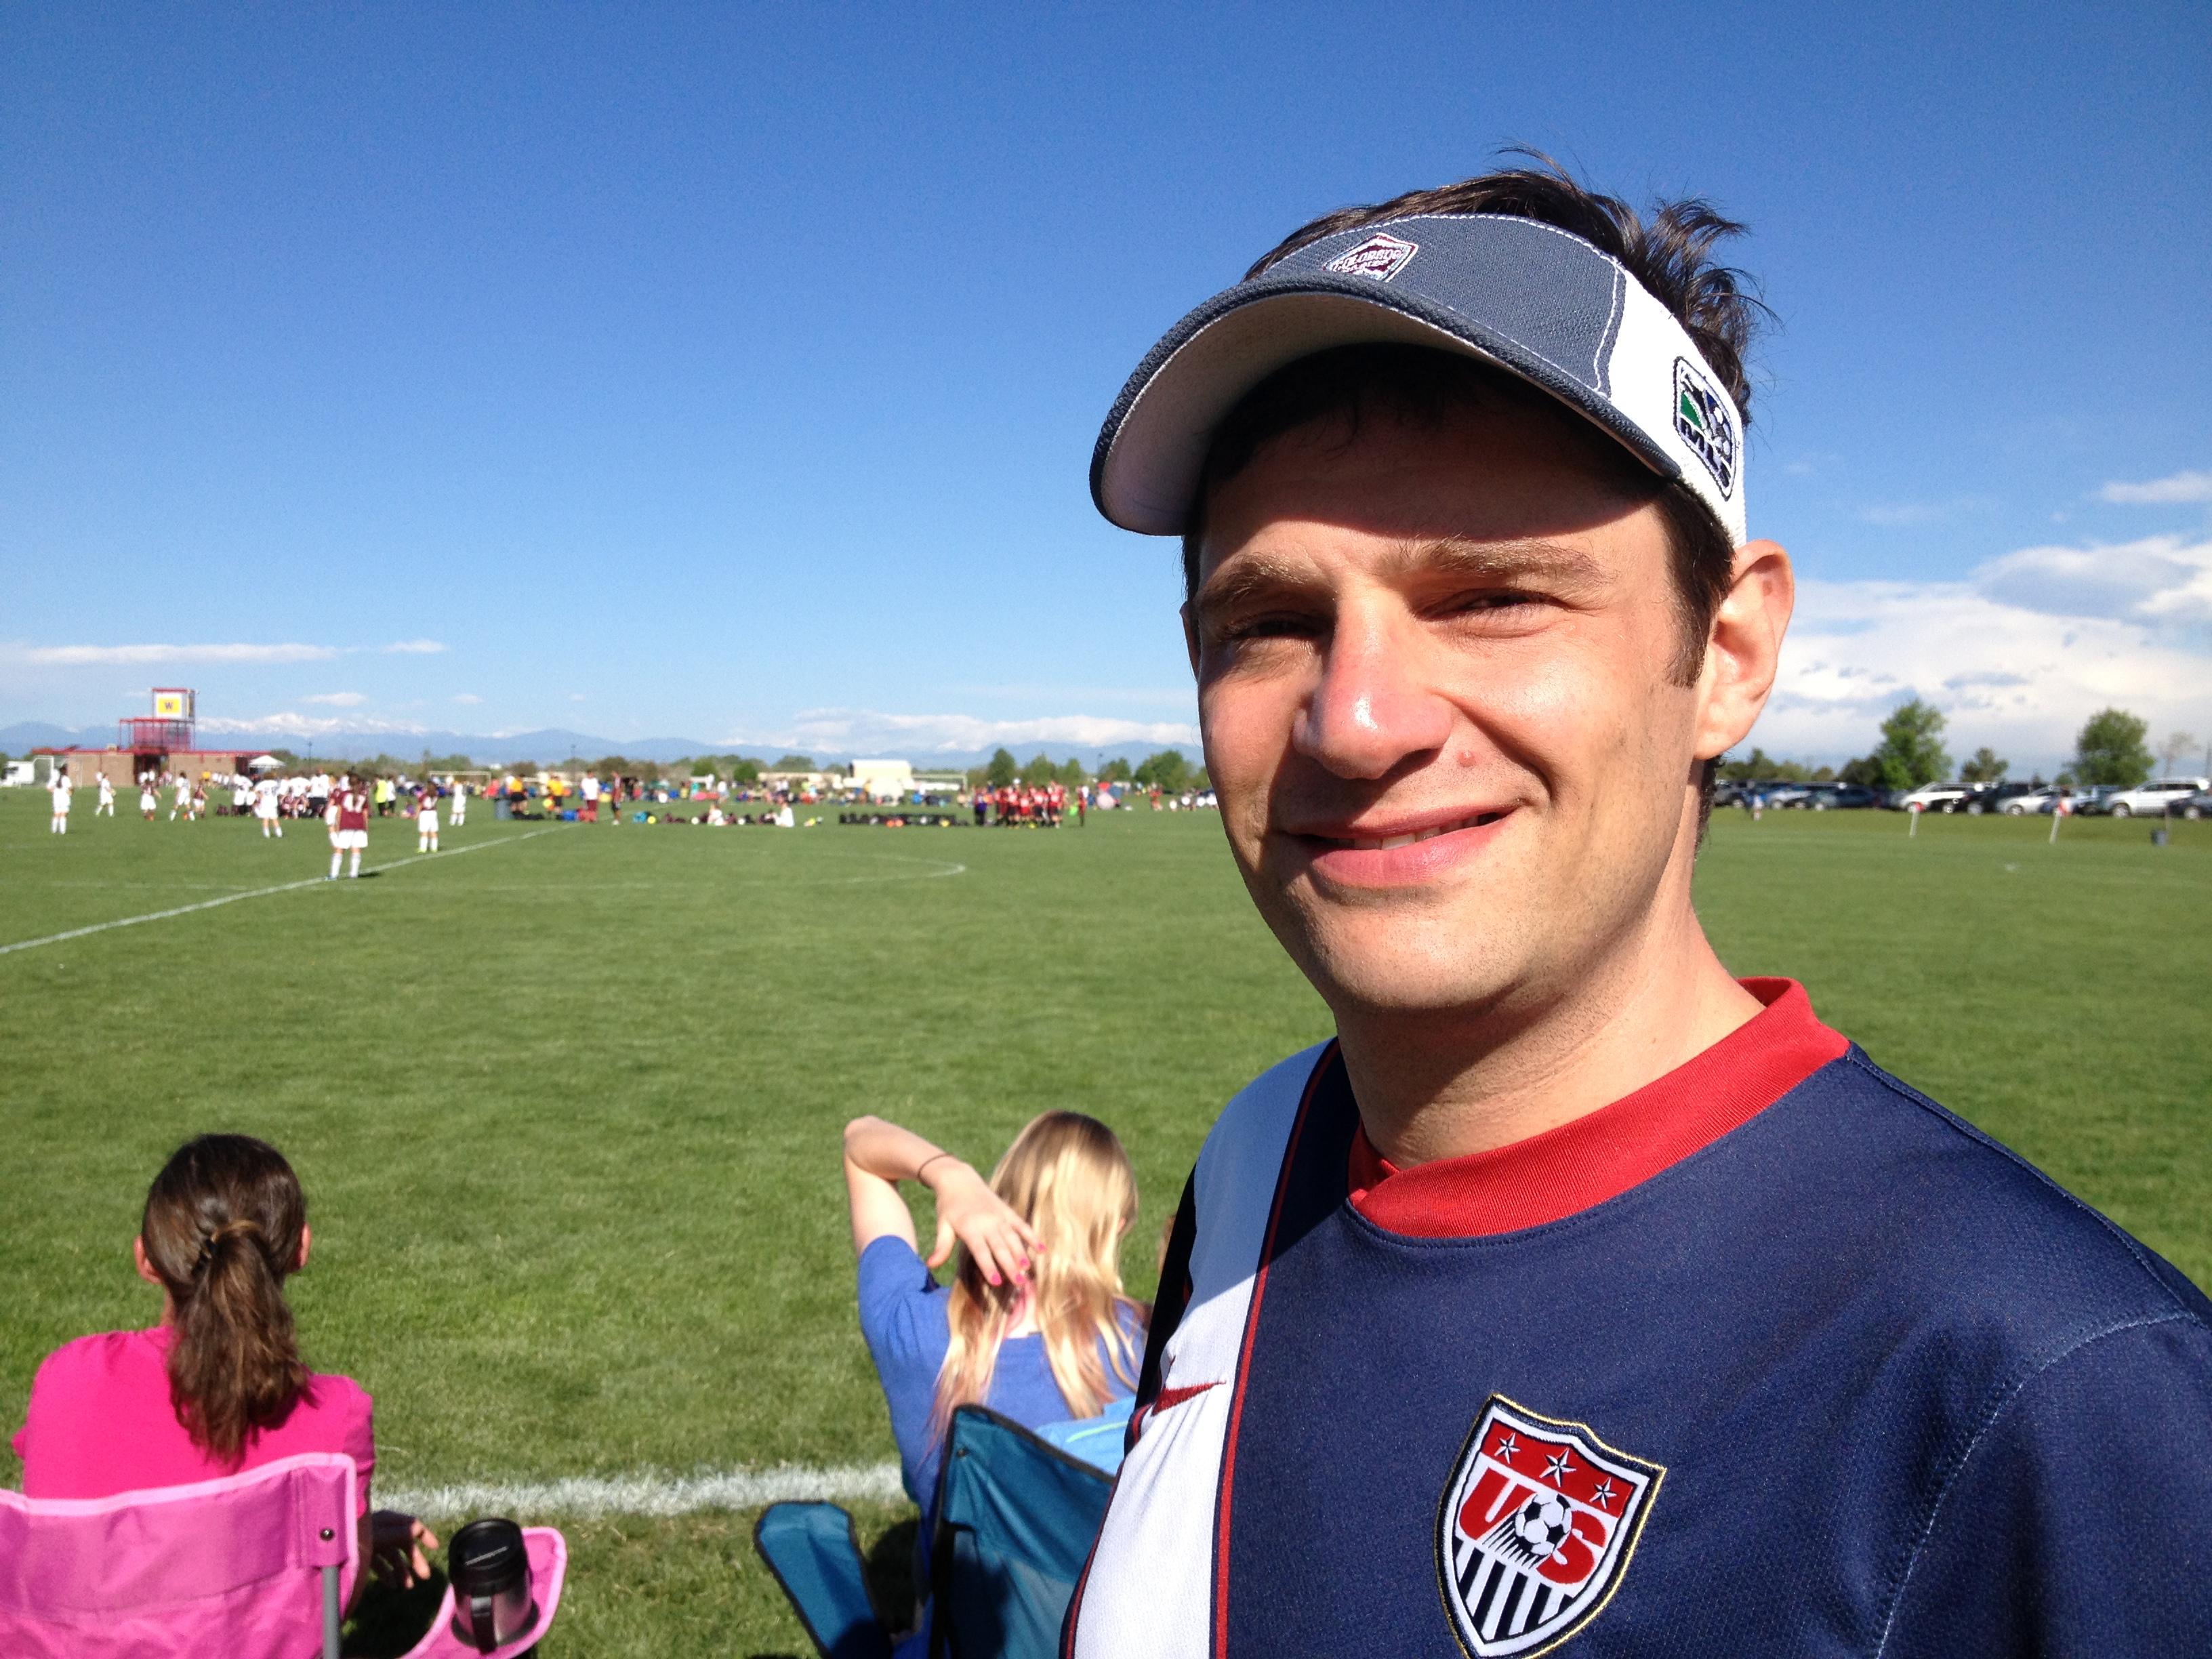 Soccer dad headed to Brazil for World Cup